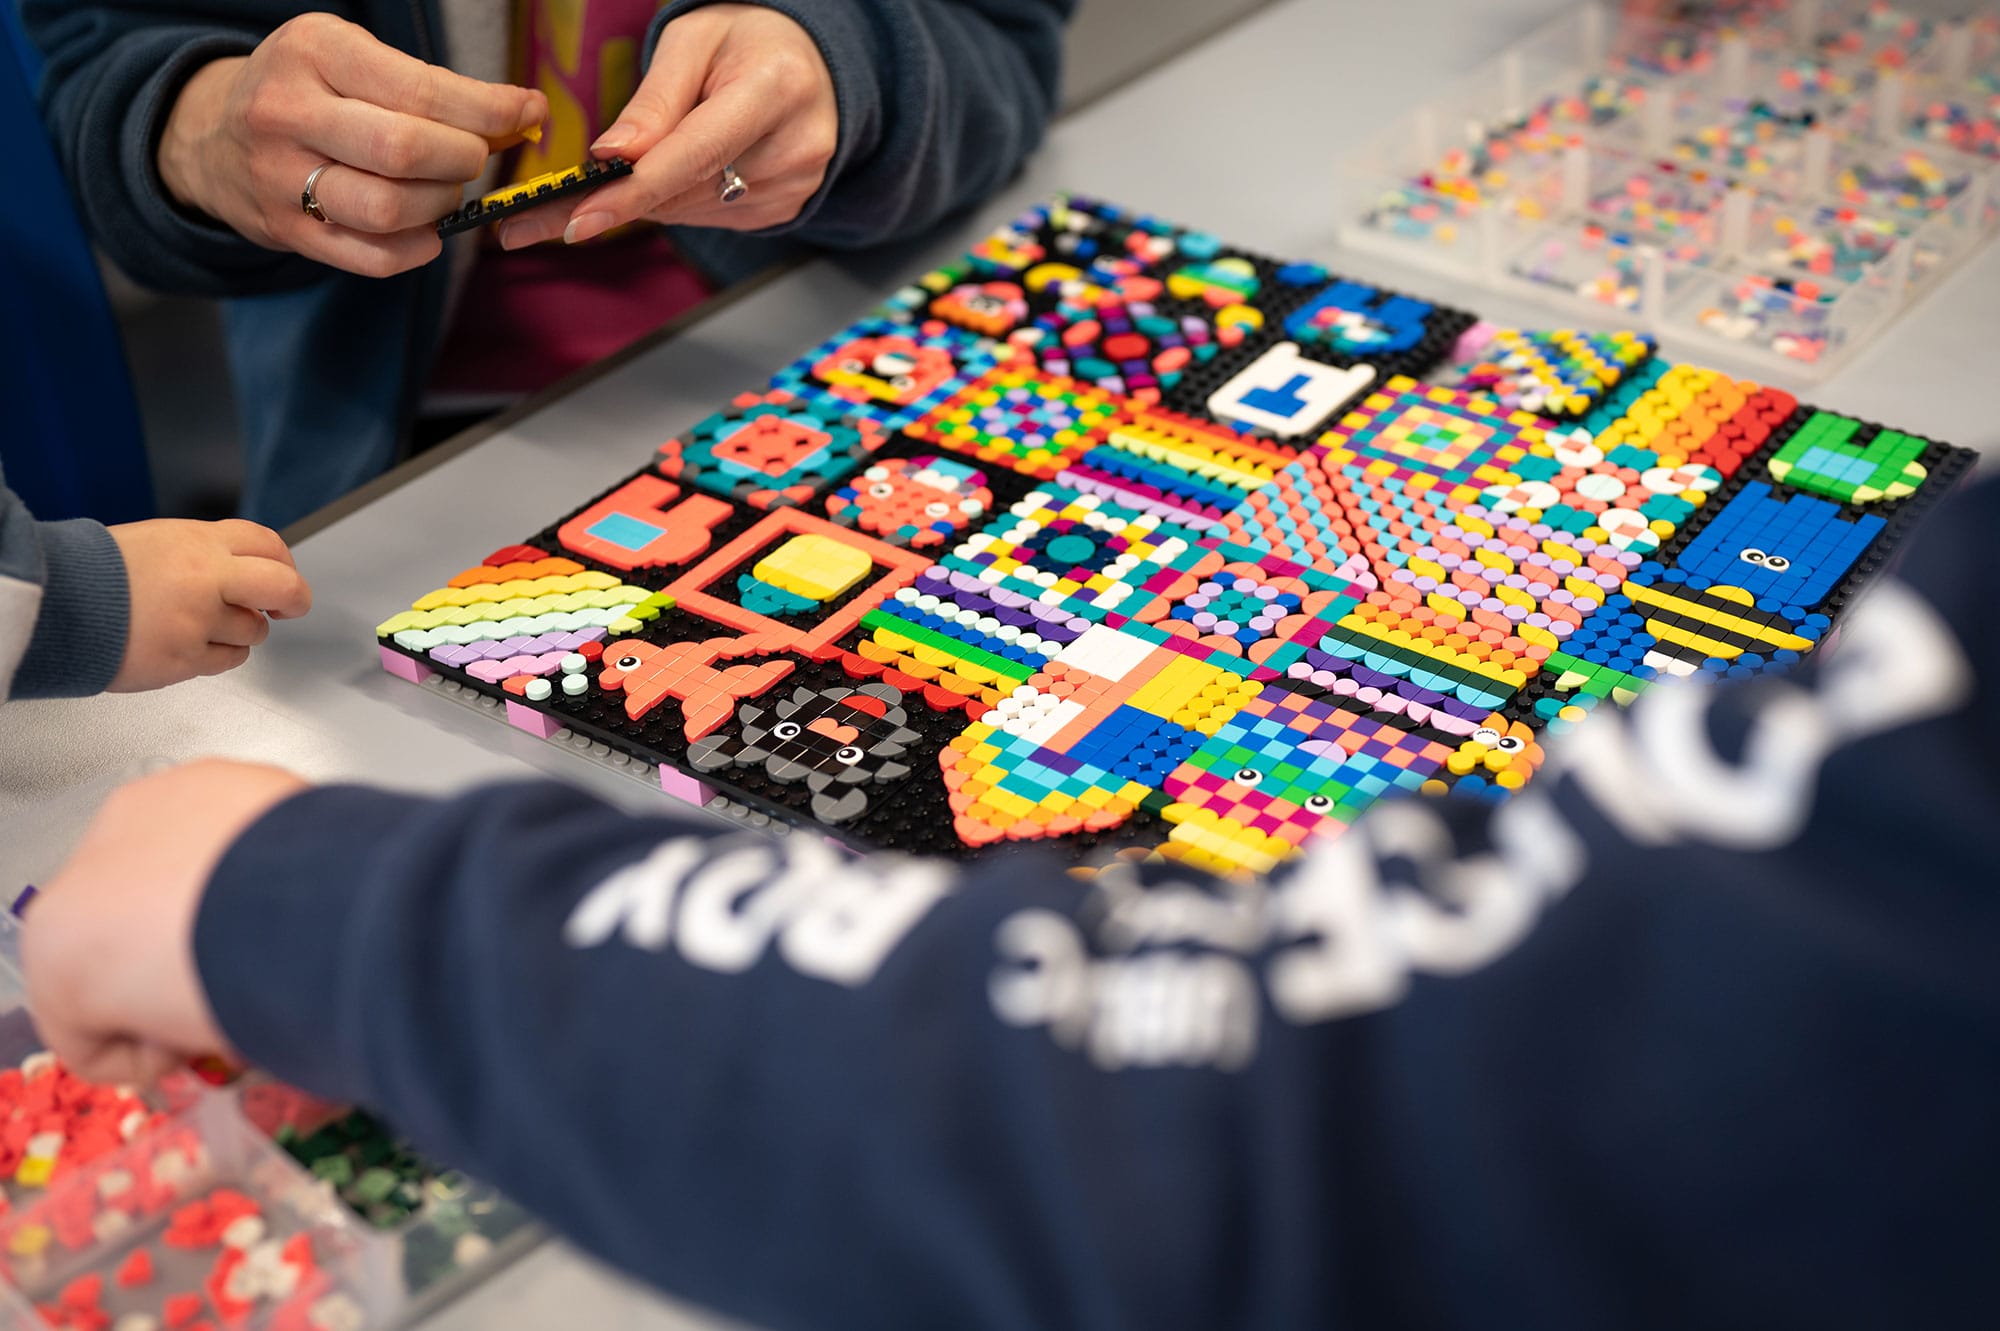 A high quality photo of a mosaic building workshop. Two participants are working on a mosaic of colourful plastic beads in various intricate patterns.